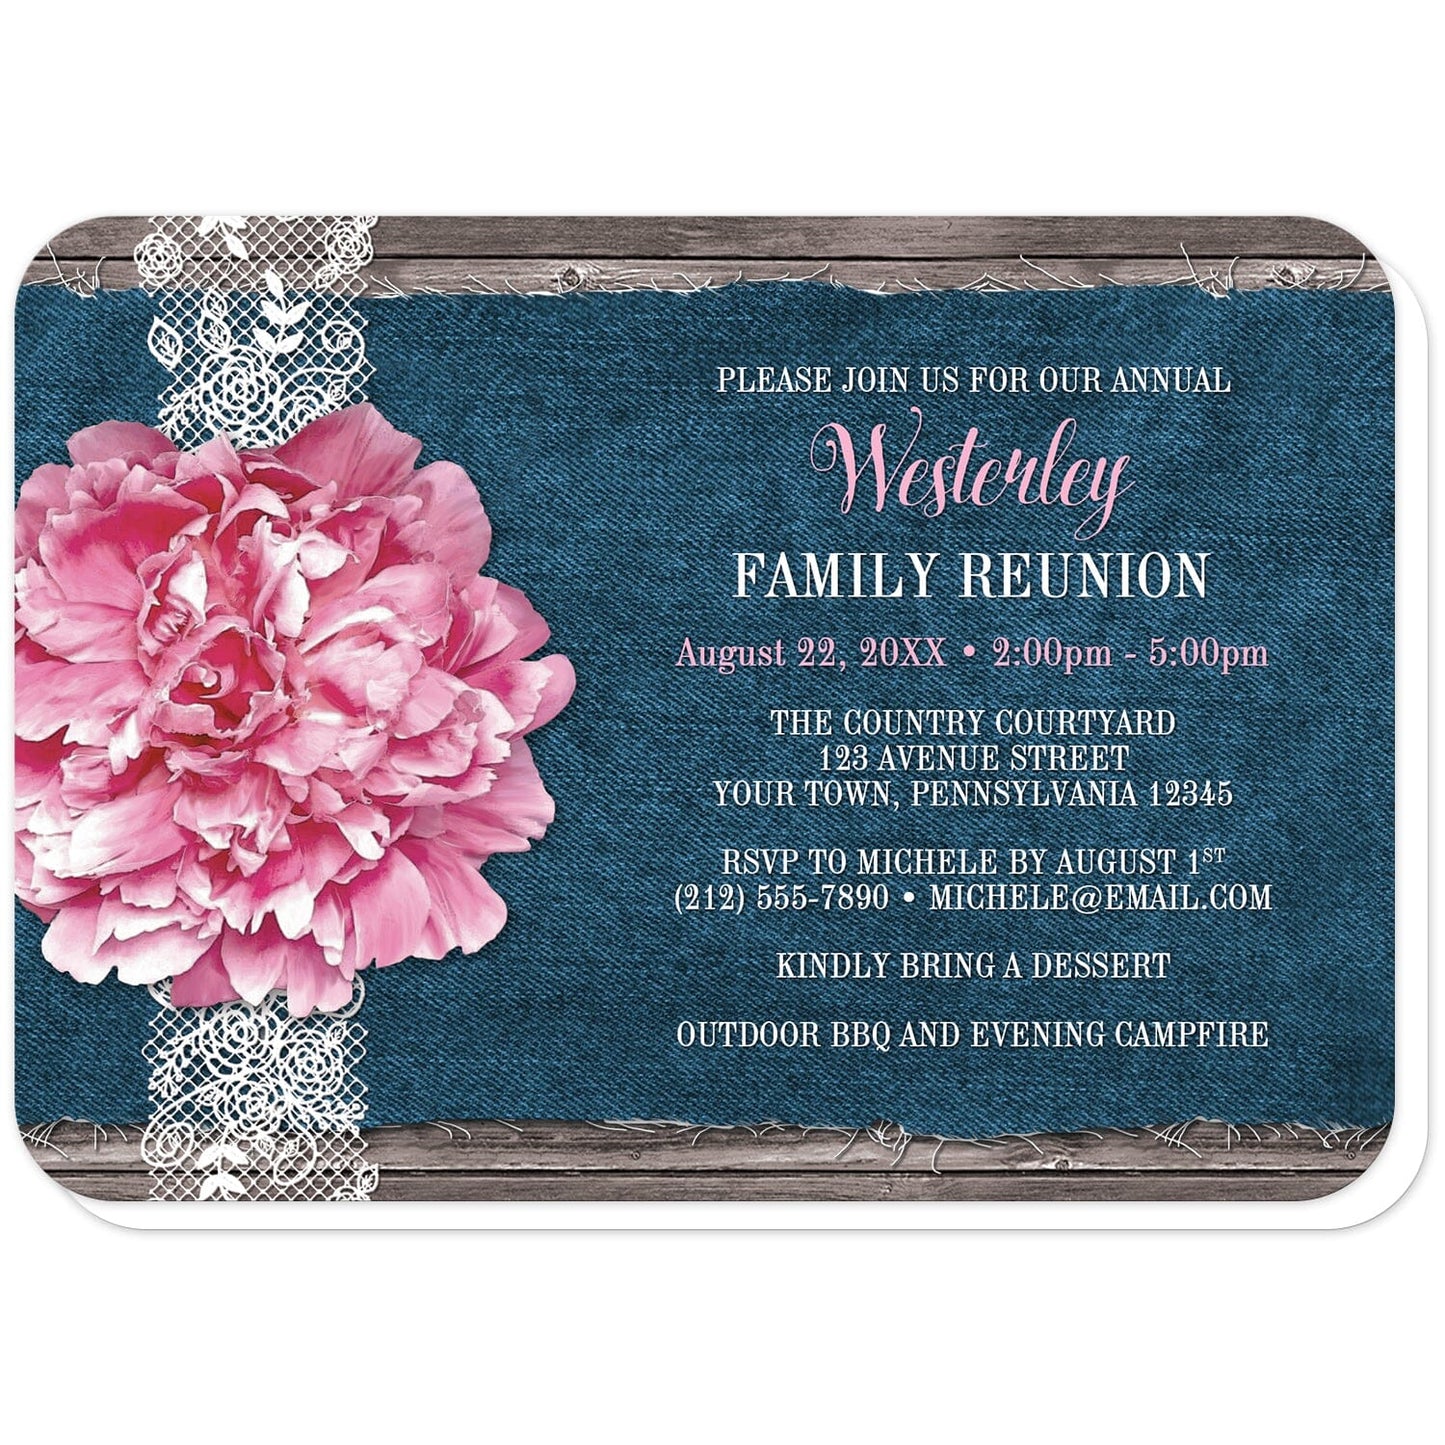 Pink Peony Denim and Lace Rustic Family Reunion Invitations (with rounded corners) at Artistically Invited. Southern-inspired pink peony denim and lace rustic family reunion invitations with a pretty pink peony flower on a white lace ribbon design on the left side over a fraying navy blue denim illustration on a rustic wood background. Your personalized reunion celebration details are custom printed in white and pink over the blue denim design. 